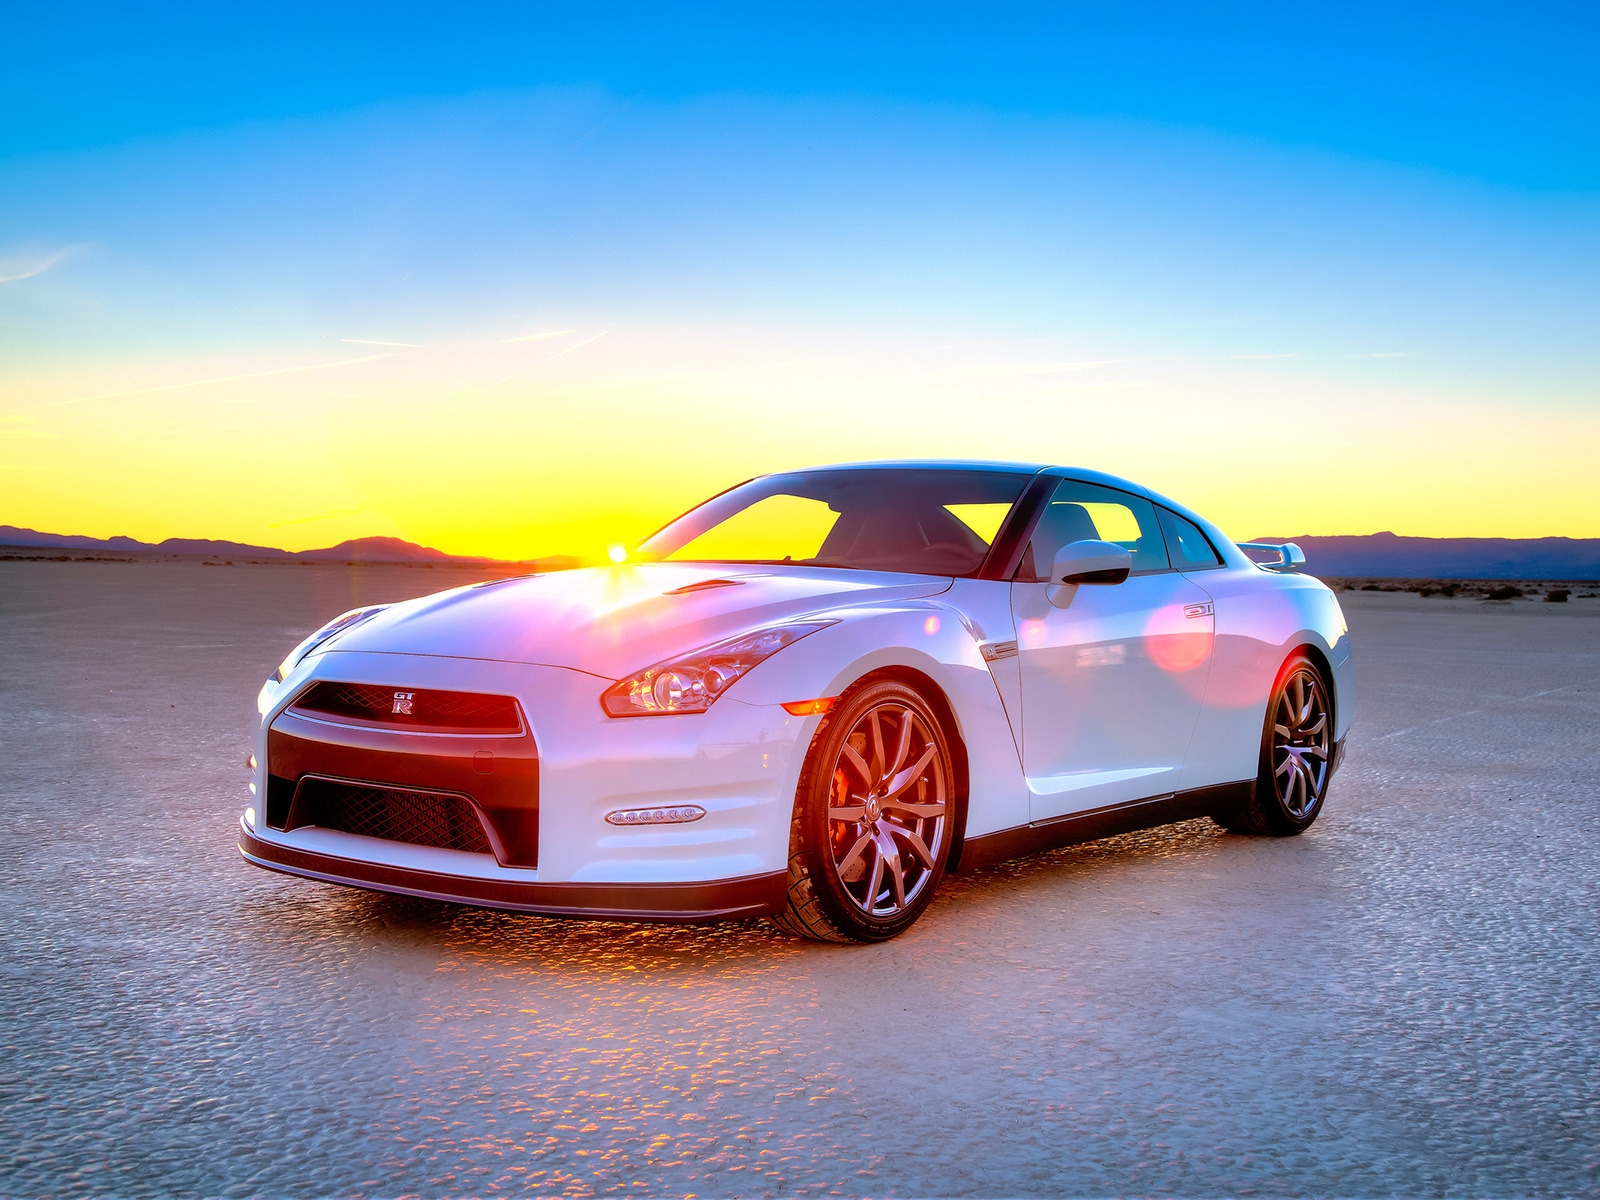 White Nissan GT-R 2014 Edition for 1600 x 1200 resolution